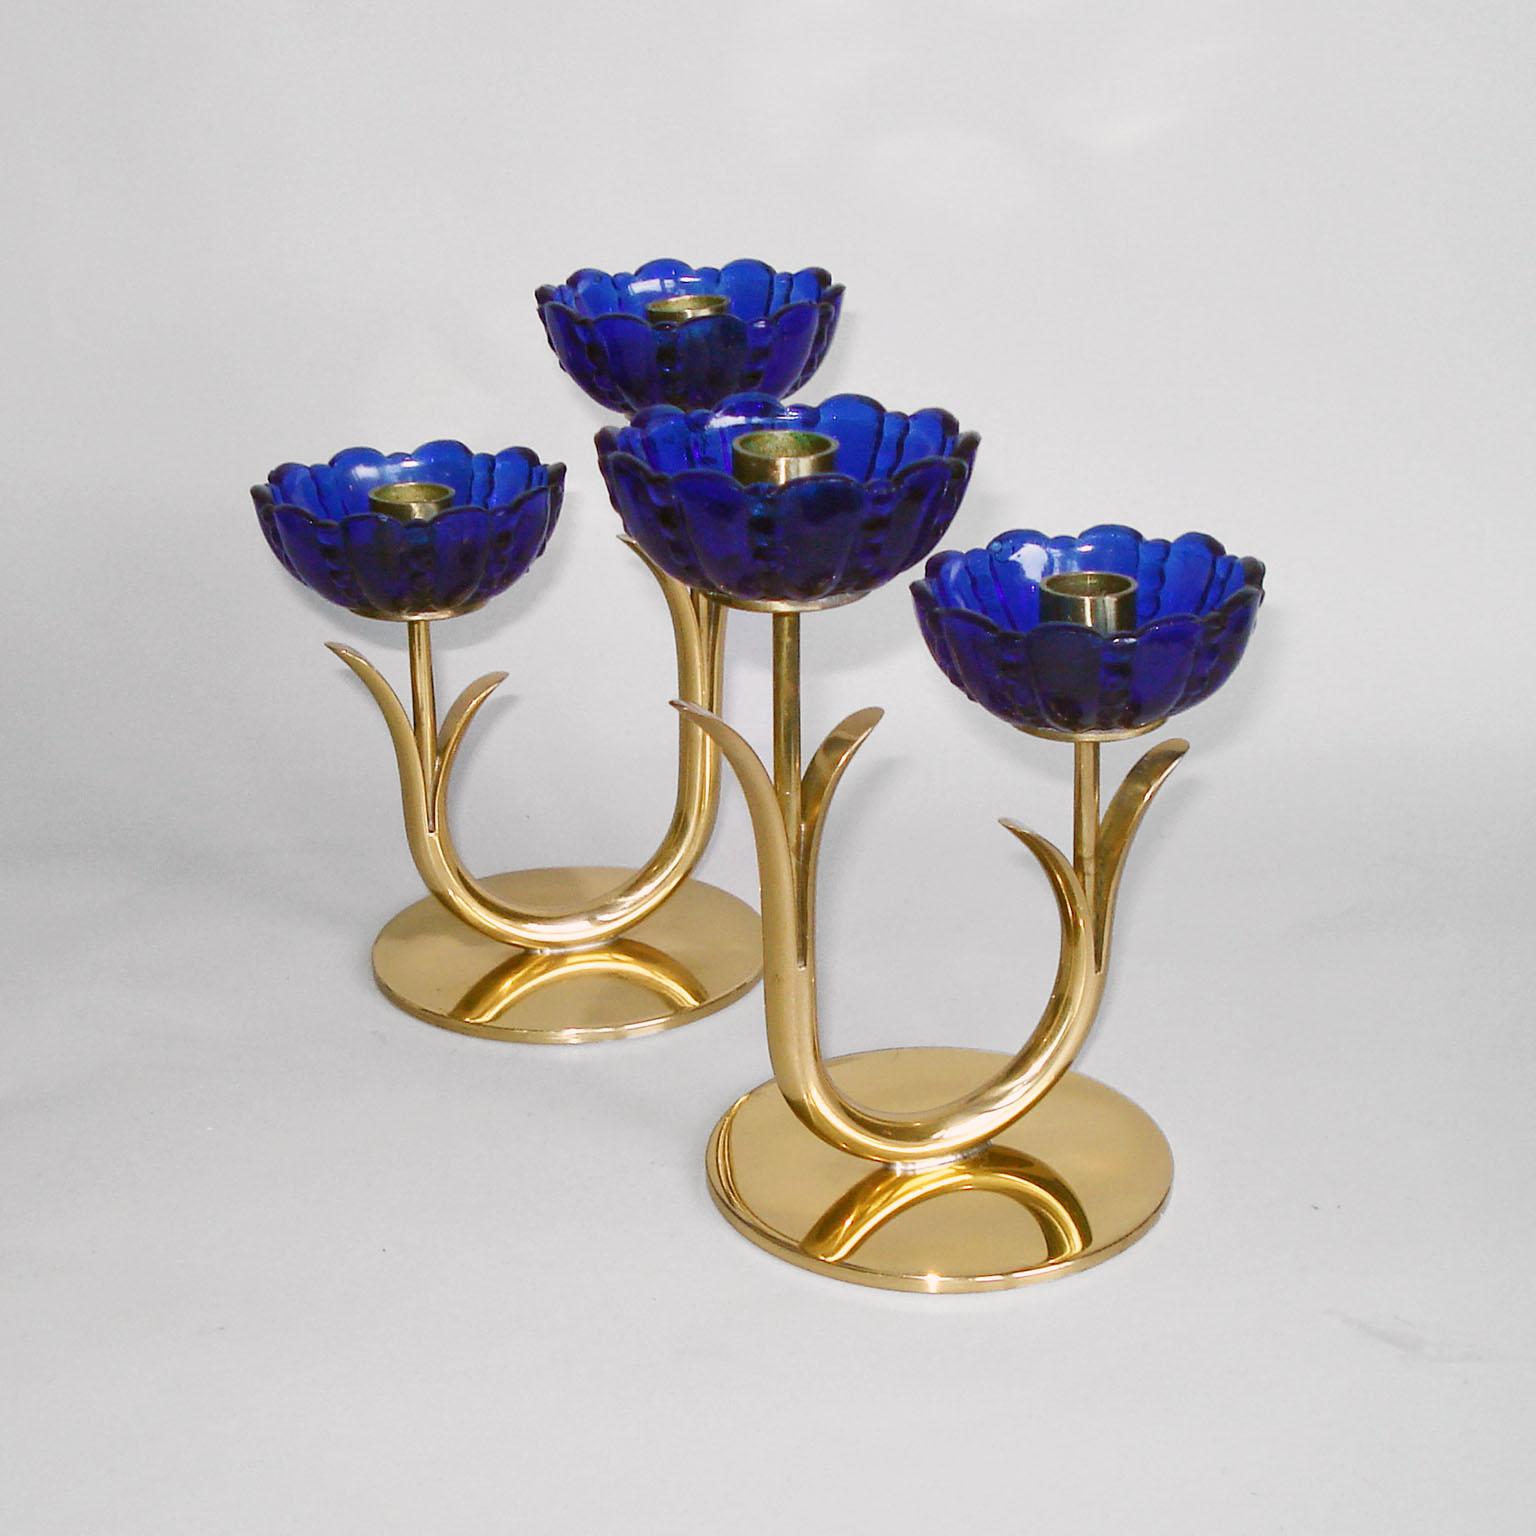 Swedish Gunnar Ander for Ystad Metall, Pair of Brass and Blue Glass Candlestick